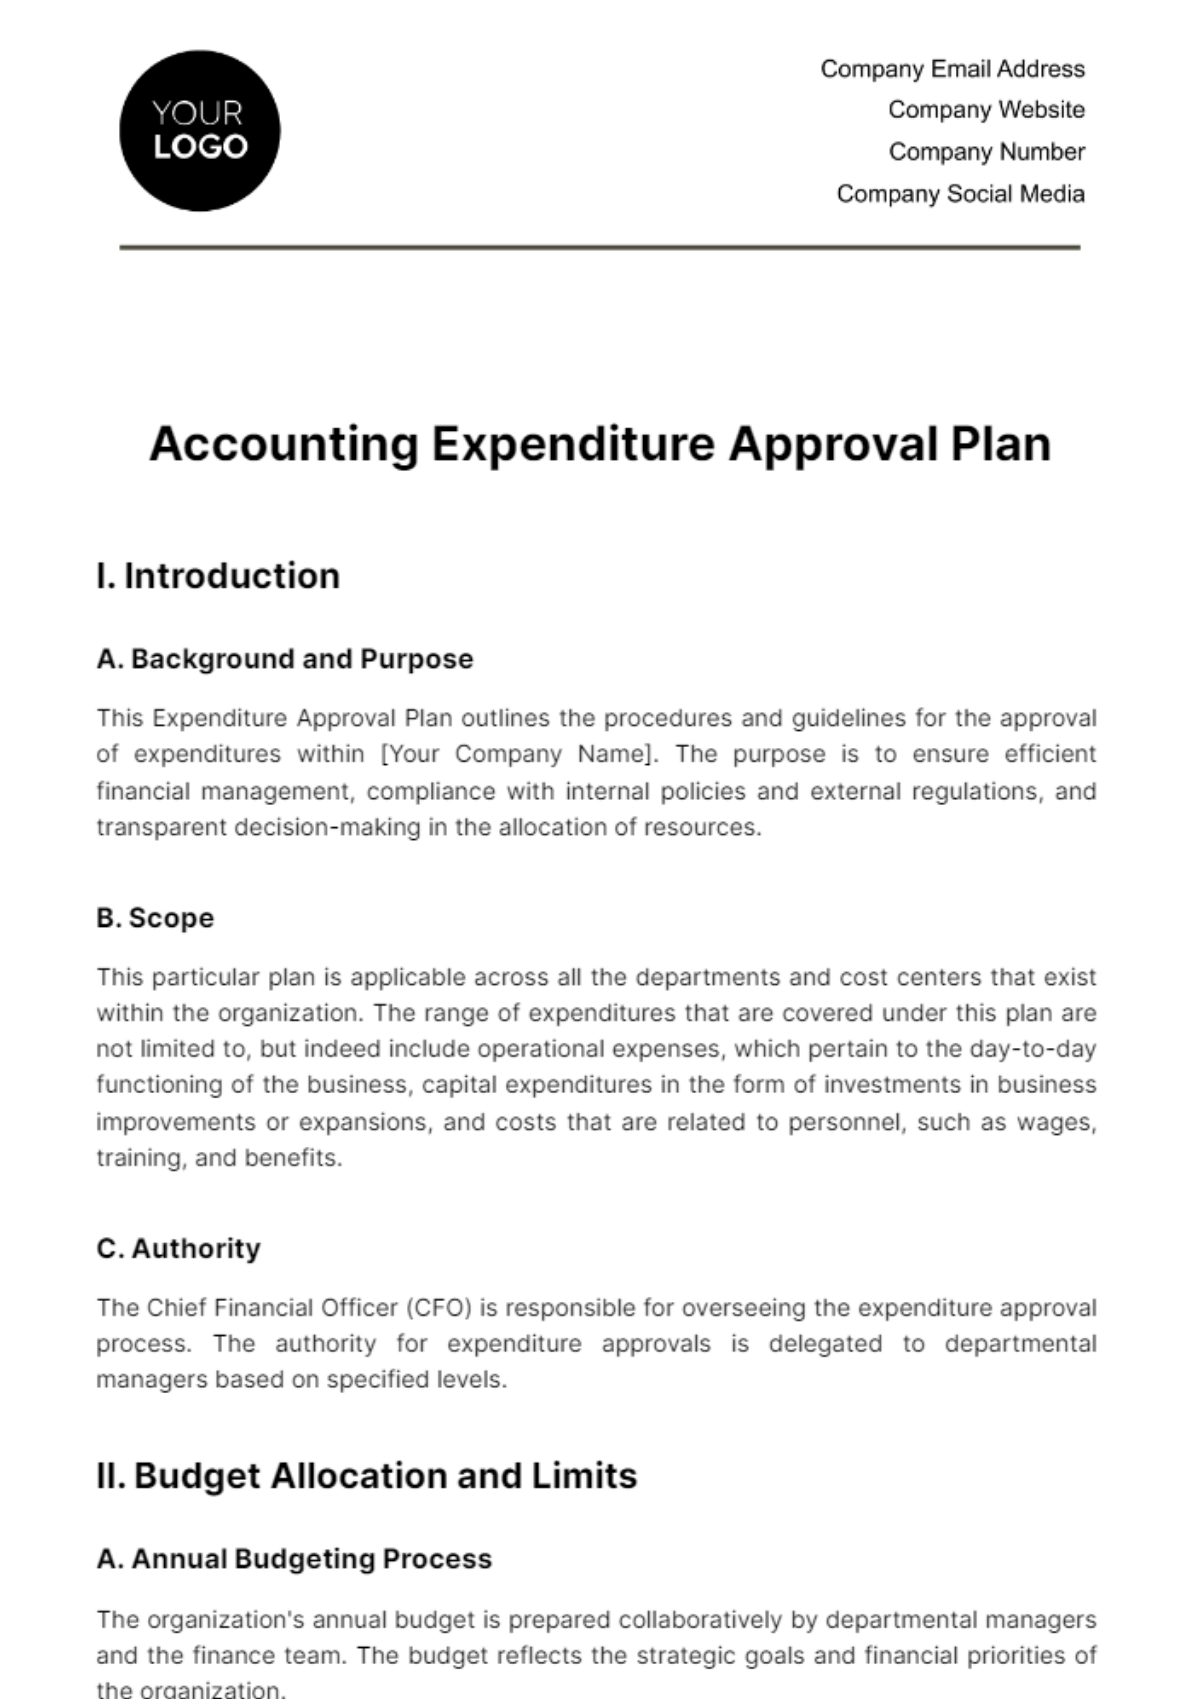 Free Accounting Expenditure Approval Plan Template